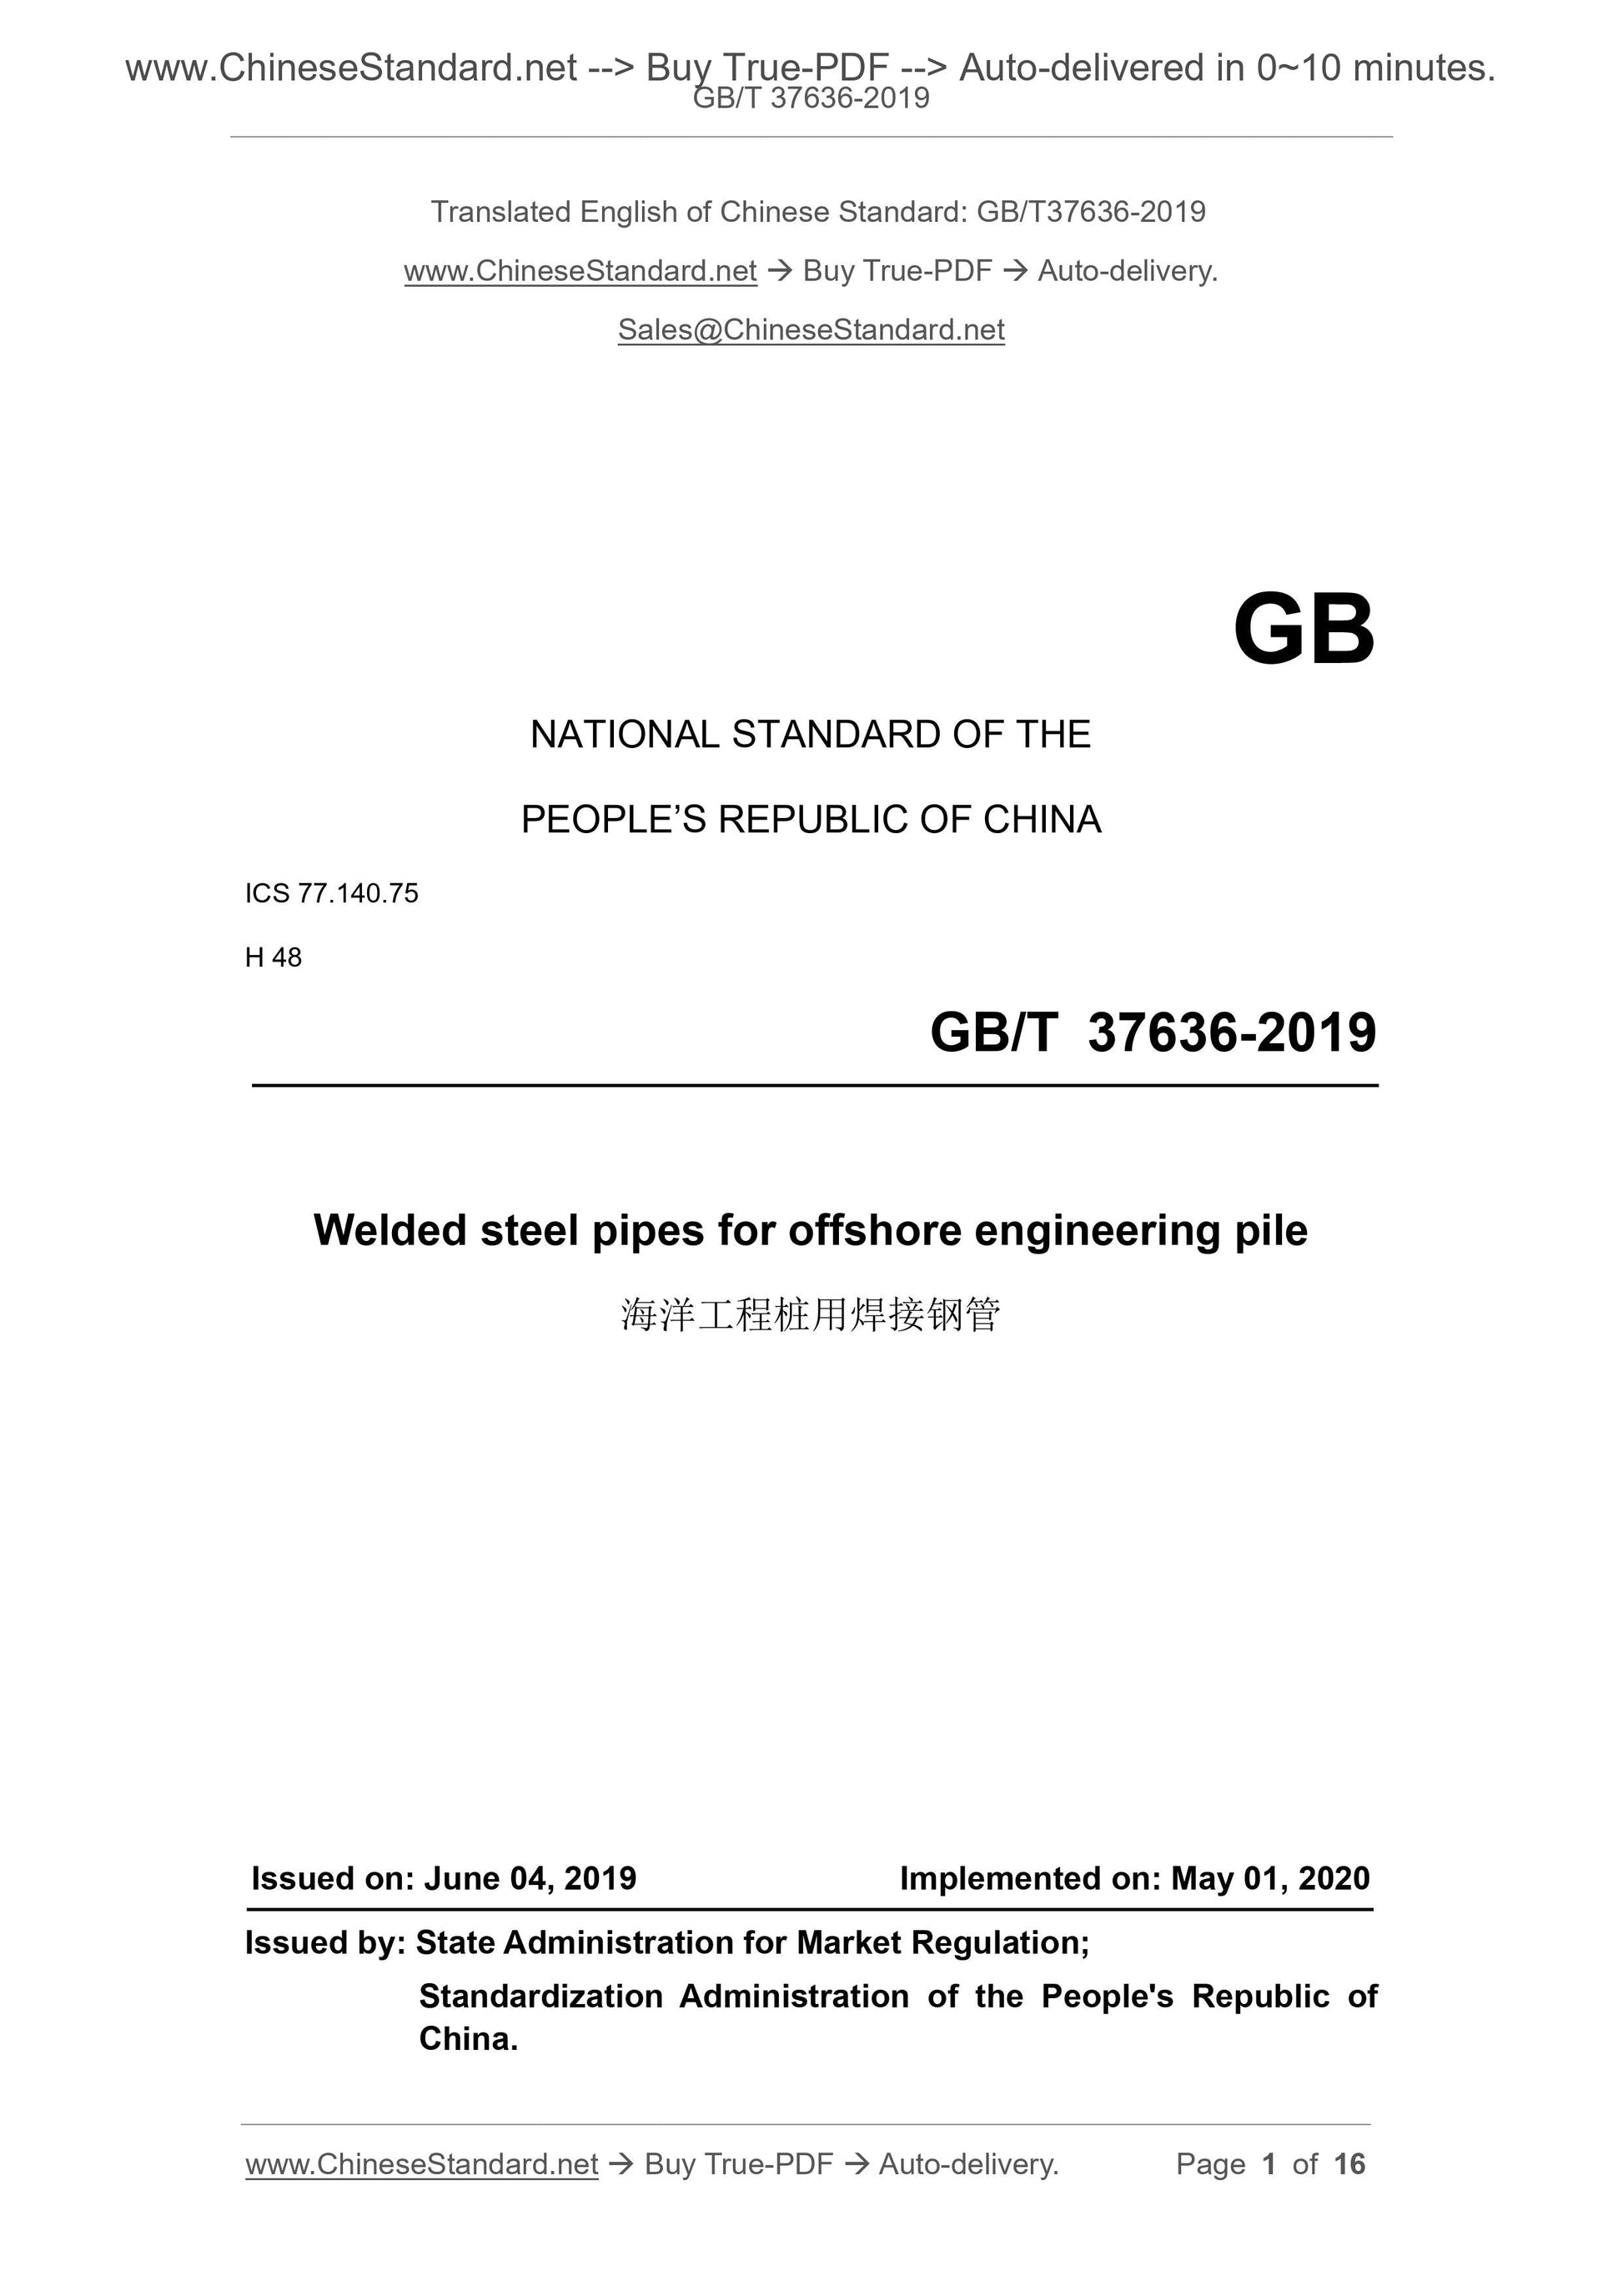 GB/T 37636-2019 Page 1